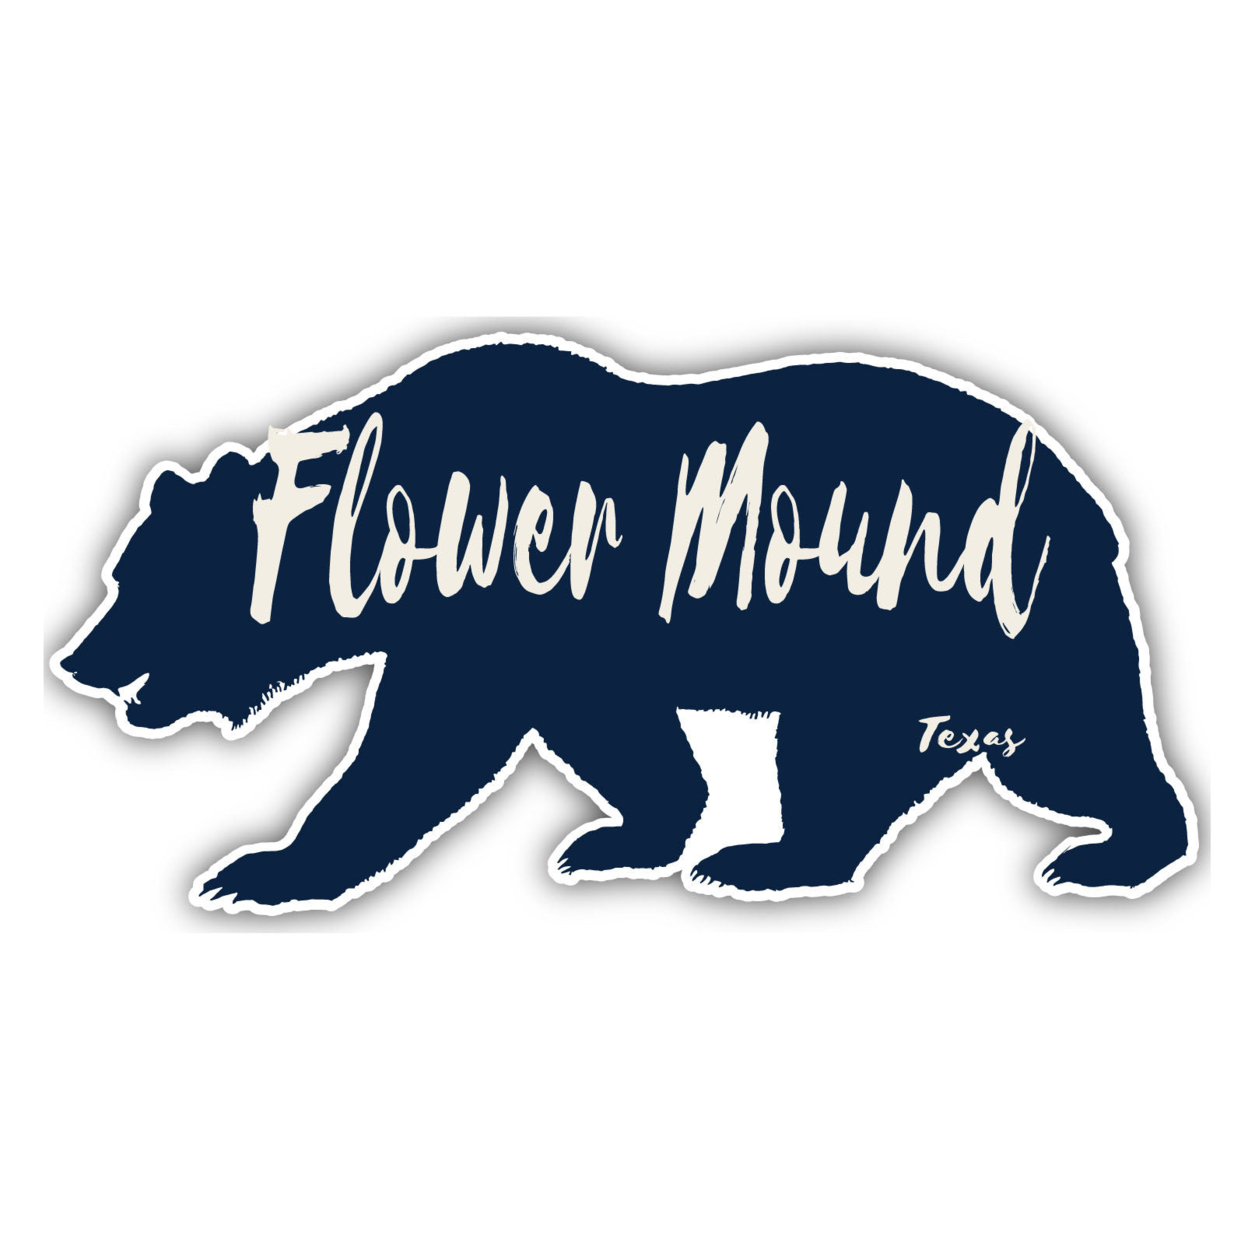 Flower Mound Texas Souvenir Decorative Stickers (Choose Theme And Size) - 4-Pack, 2-Inch, Tent